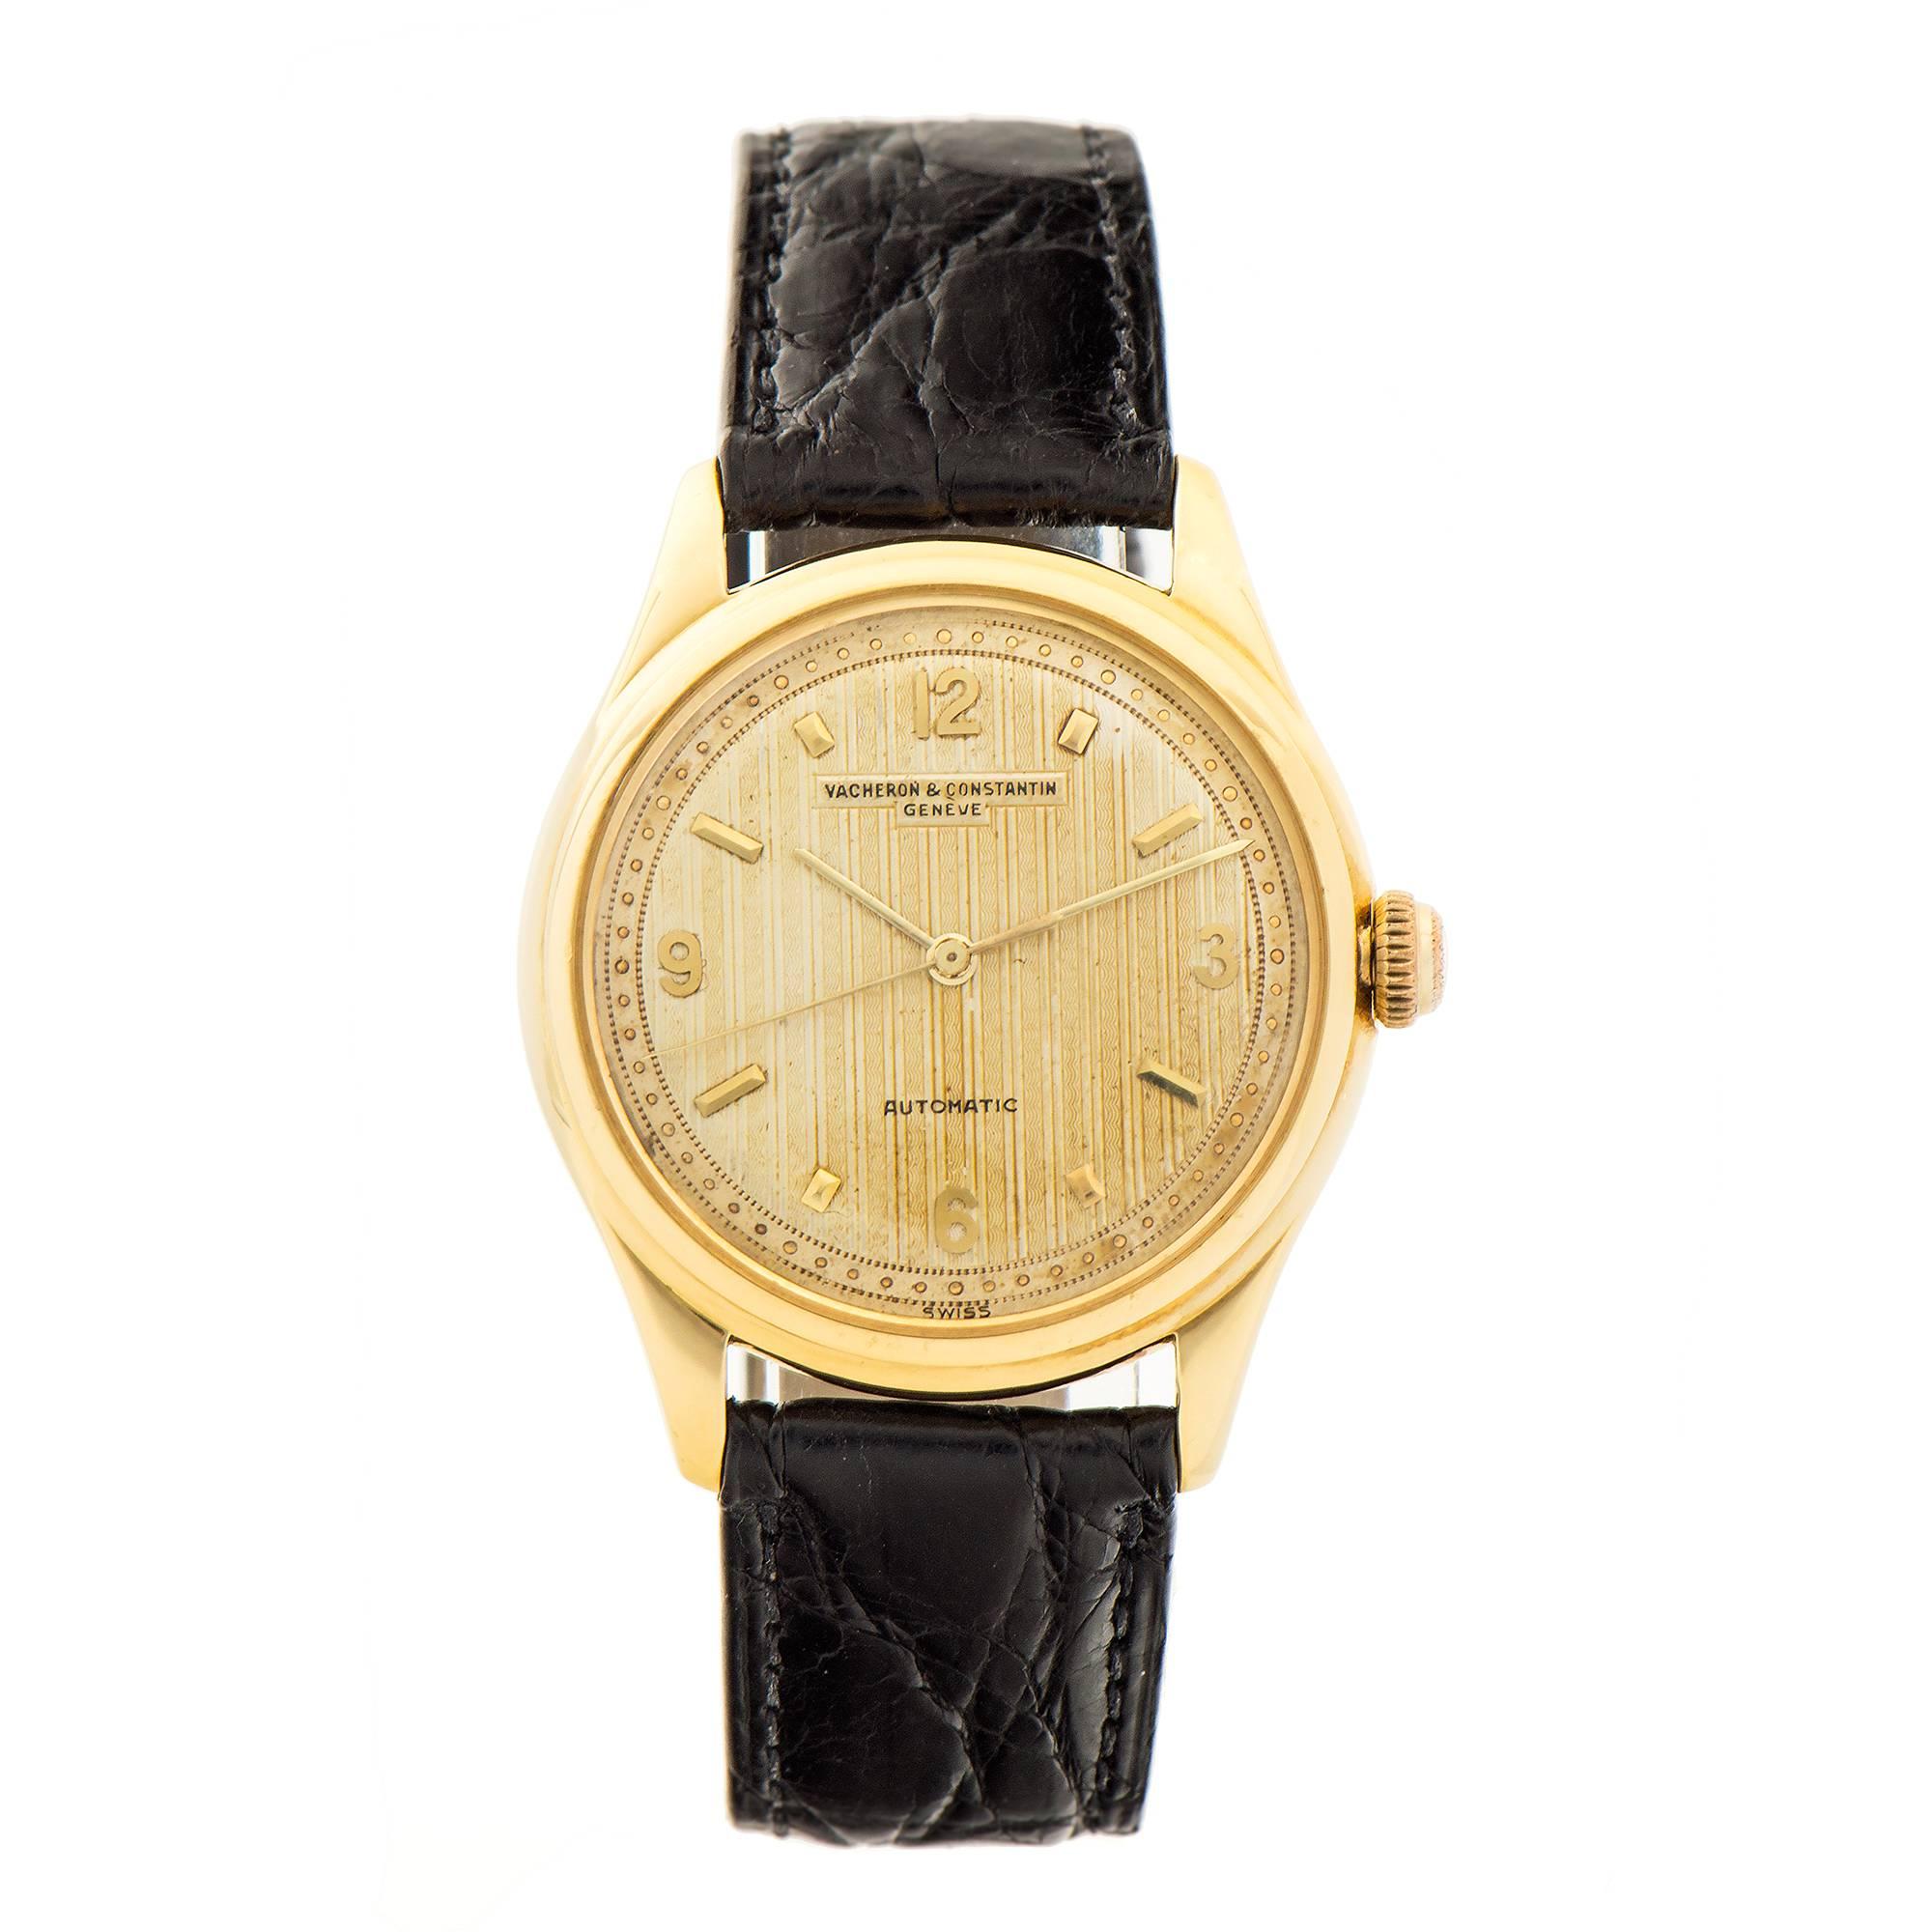 Authentic all original Vacheron Constantin genuine automatic wrist watch with factory original gold tone. Highly detailed pin stripe dial. 1960

18k yellow gold
45.5 grams
Length: 42.19mm
Width: 35mm
Band width at case: 18mm
Case thickness: